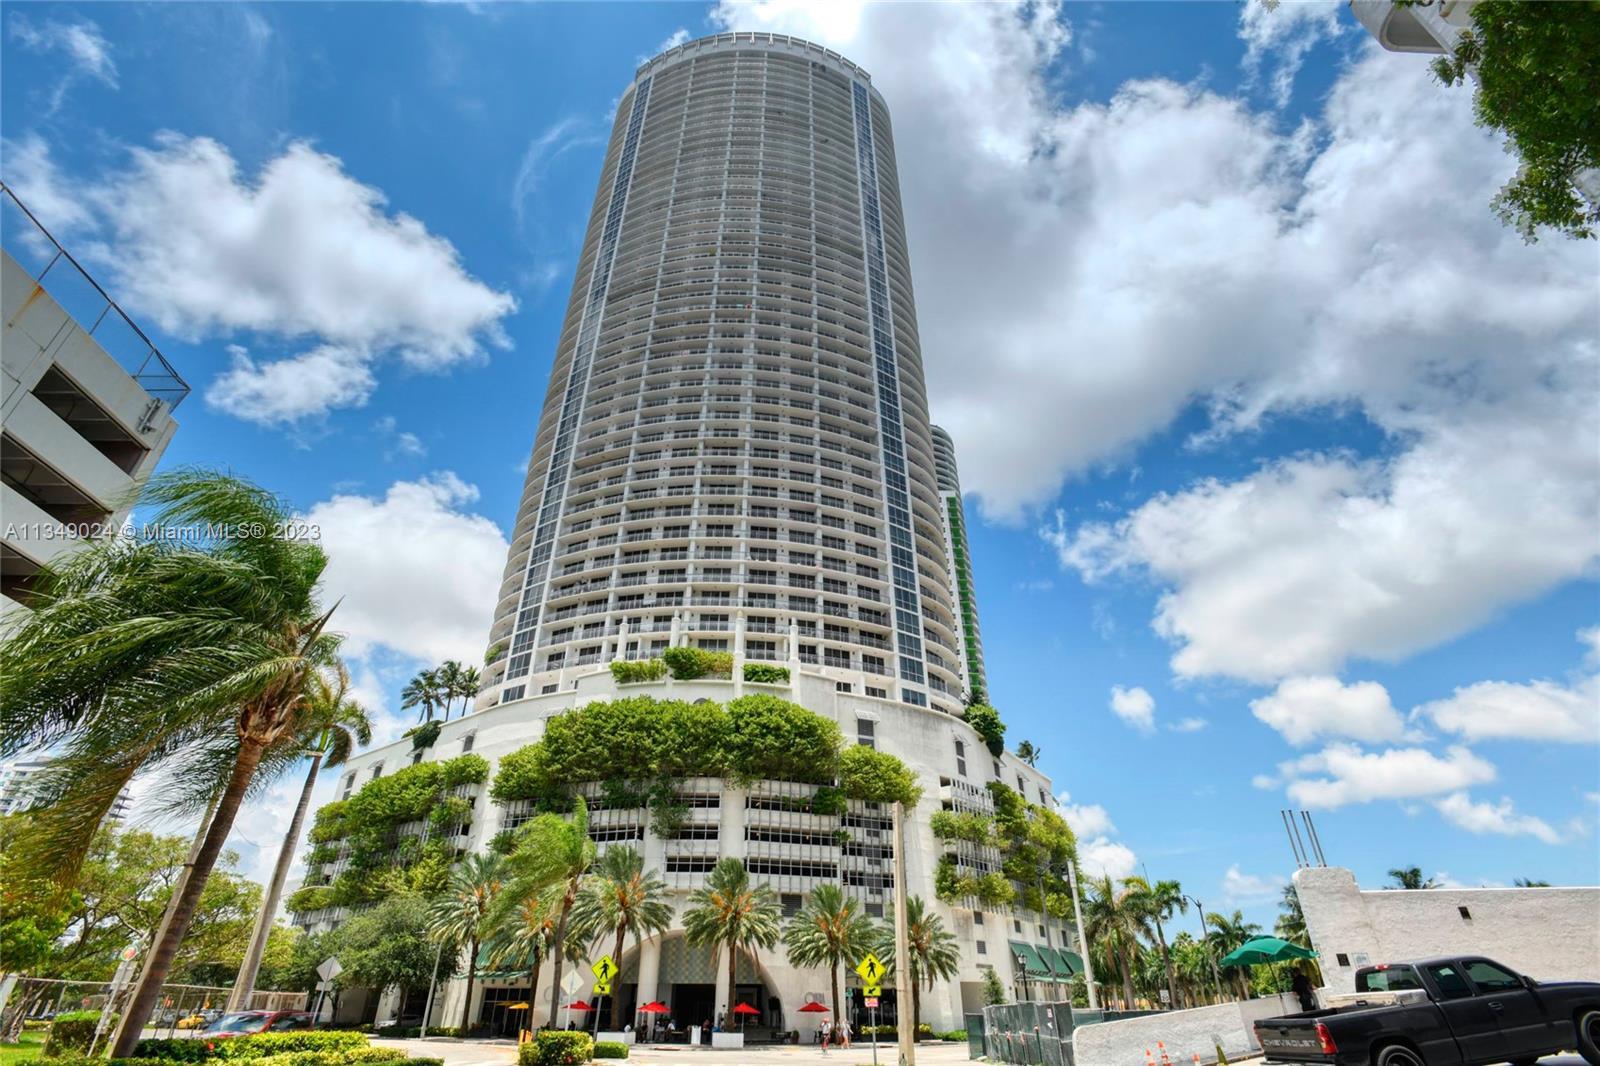 Nice 1 bed/1 bath apartment with Northeast Bay partial view located in Opera Tower in Edgewater. The